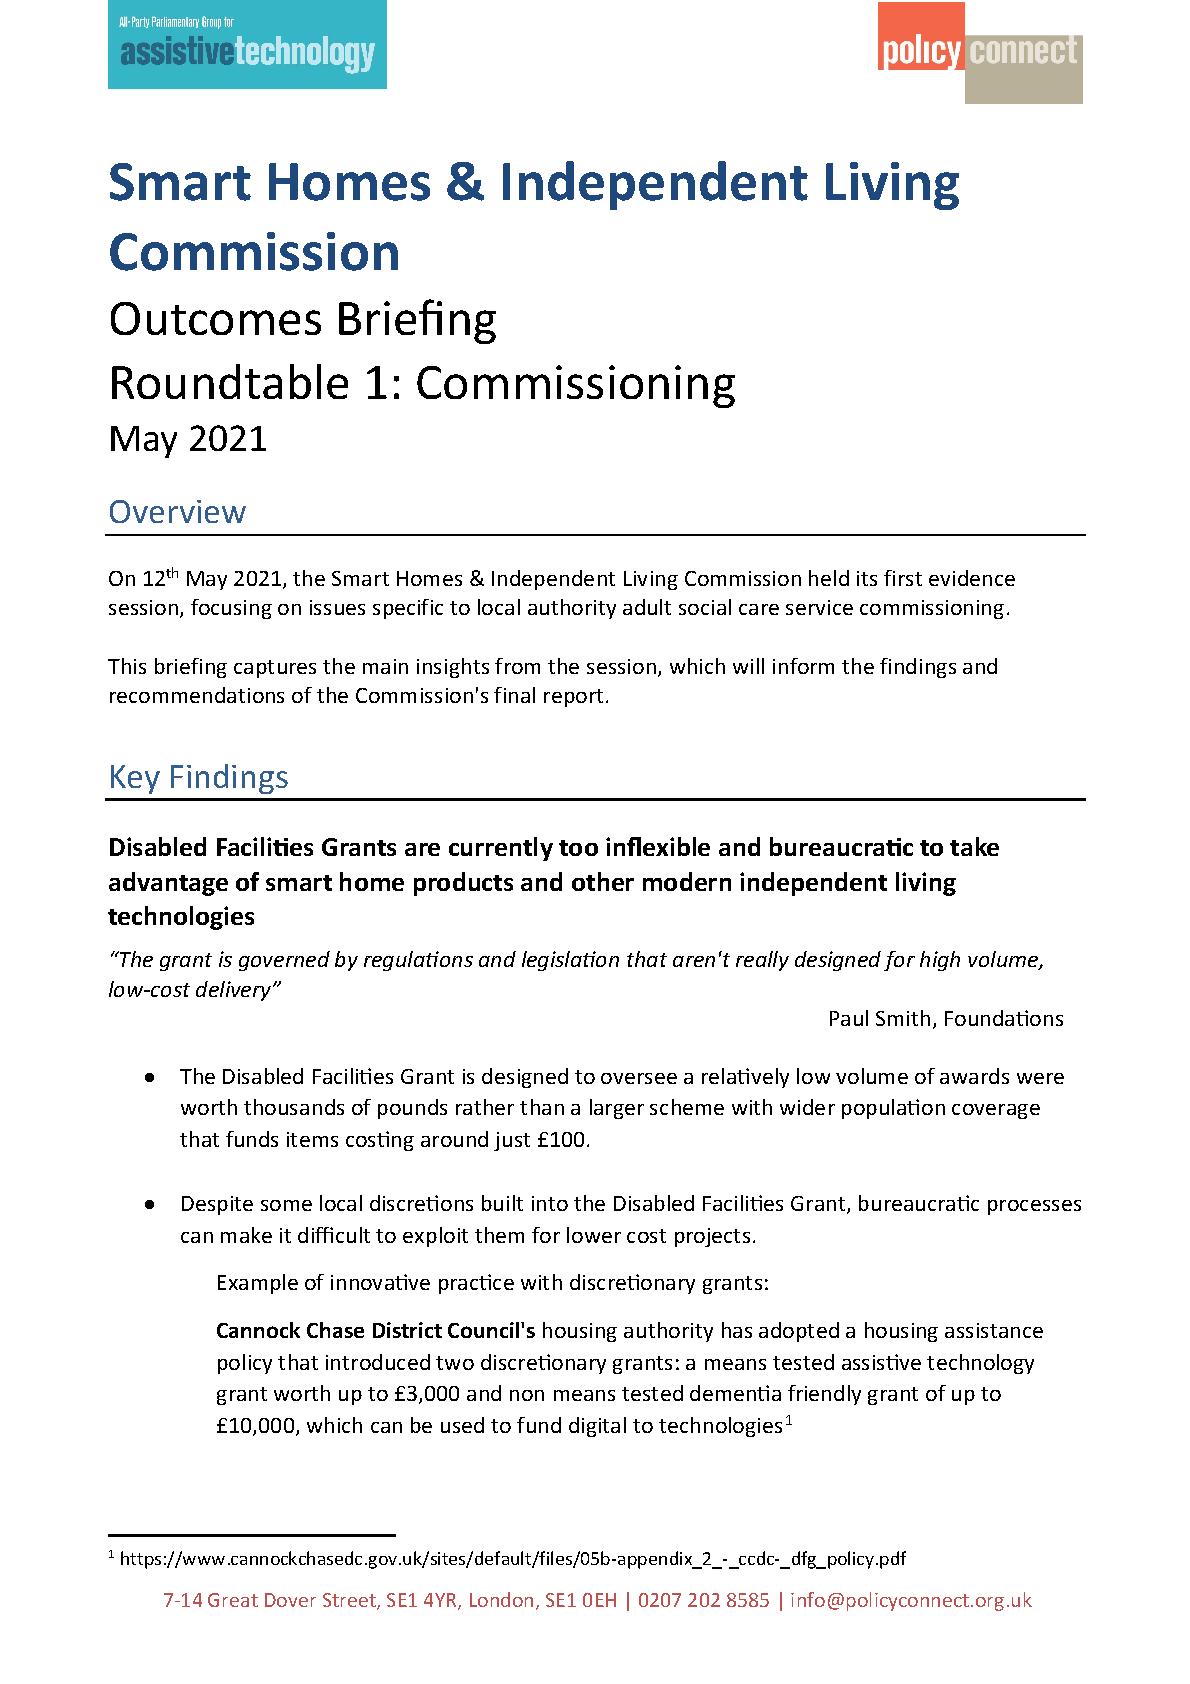 Outcomes Briefing Roundtable 1 - Commissioning - Smart Homes and Independent Living Commission